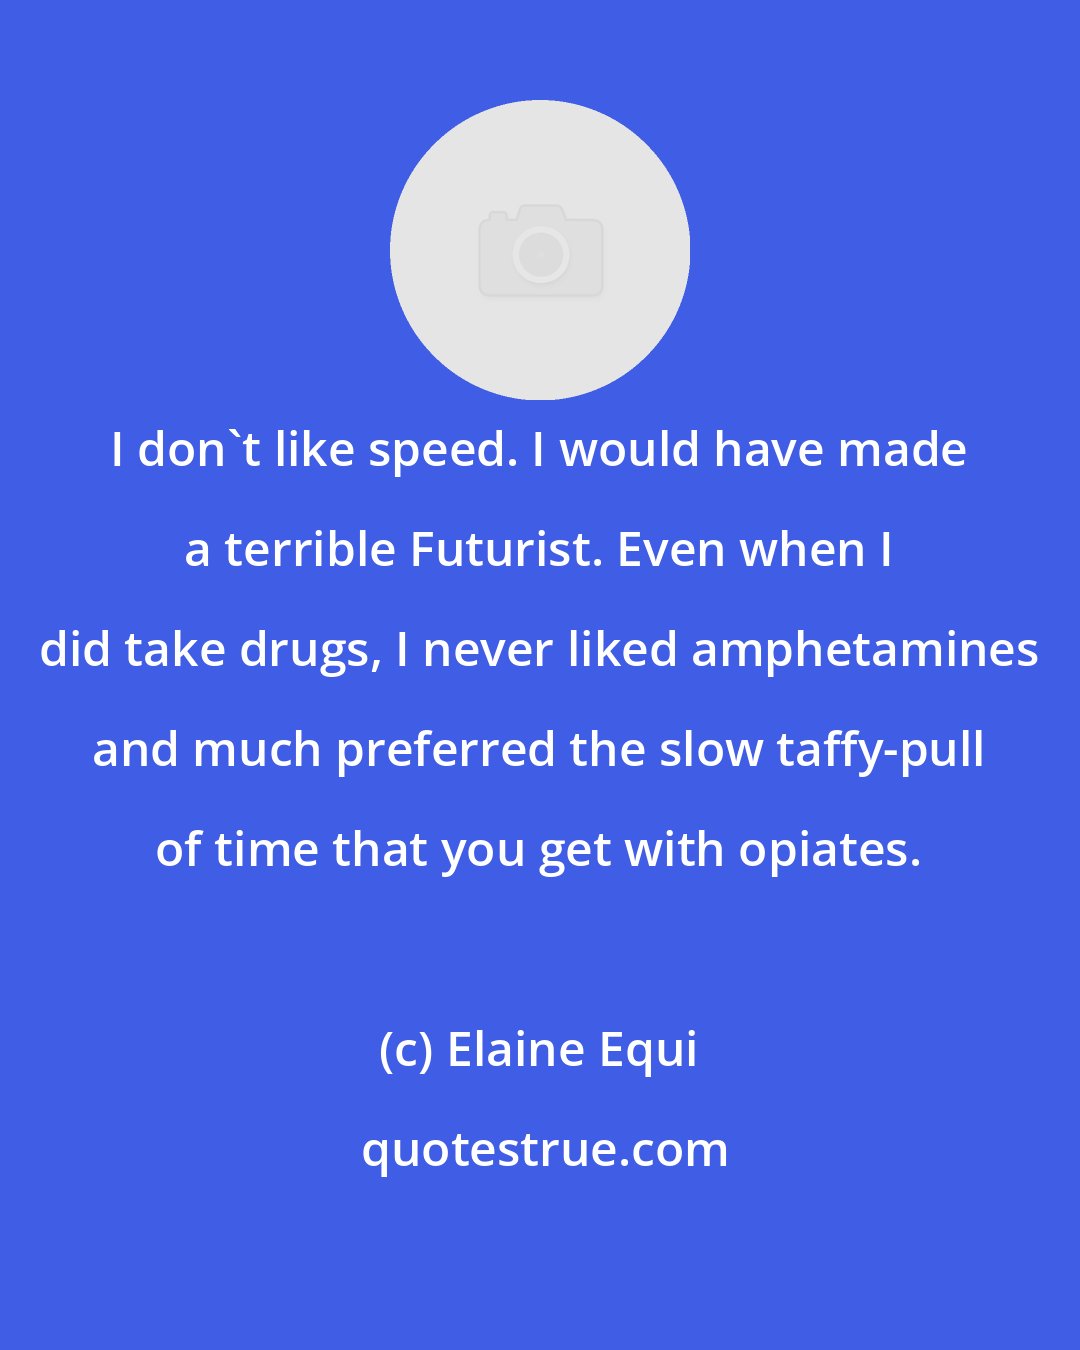 Elaine Equi: I don't like speed. I would have made a terrible Futurist. Even when I did take drugs, I never liked amphetamines and much preferred the slow taffy-pull of time that you get with opiates.